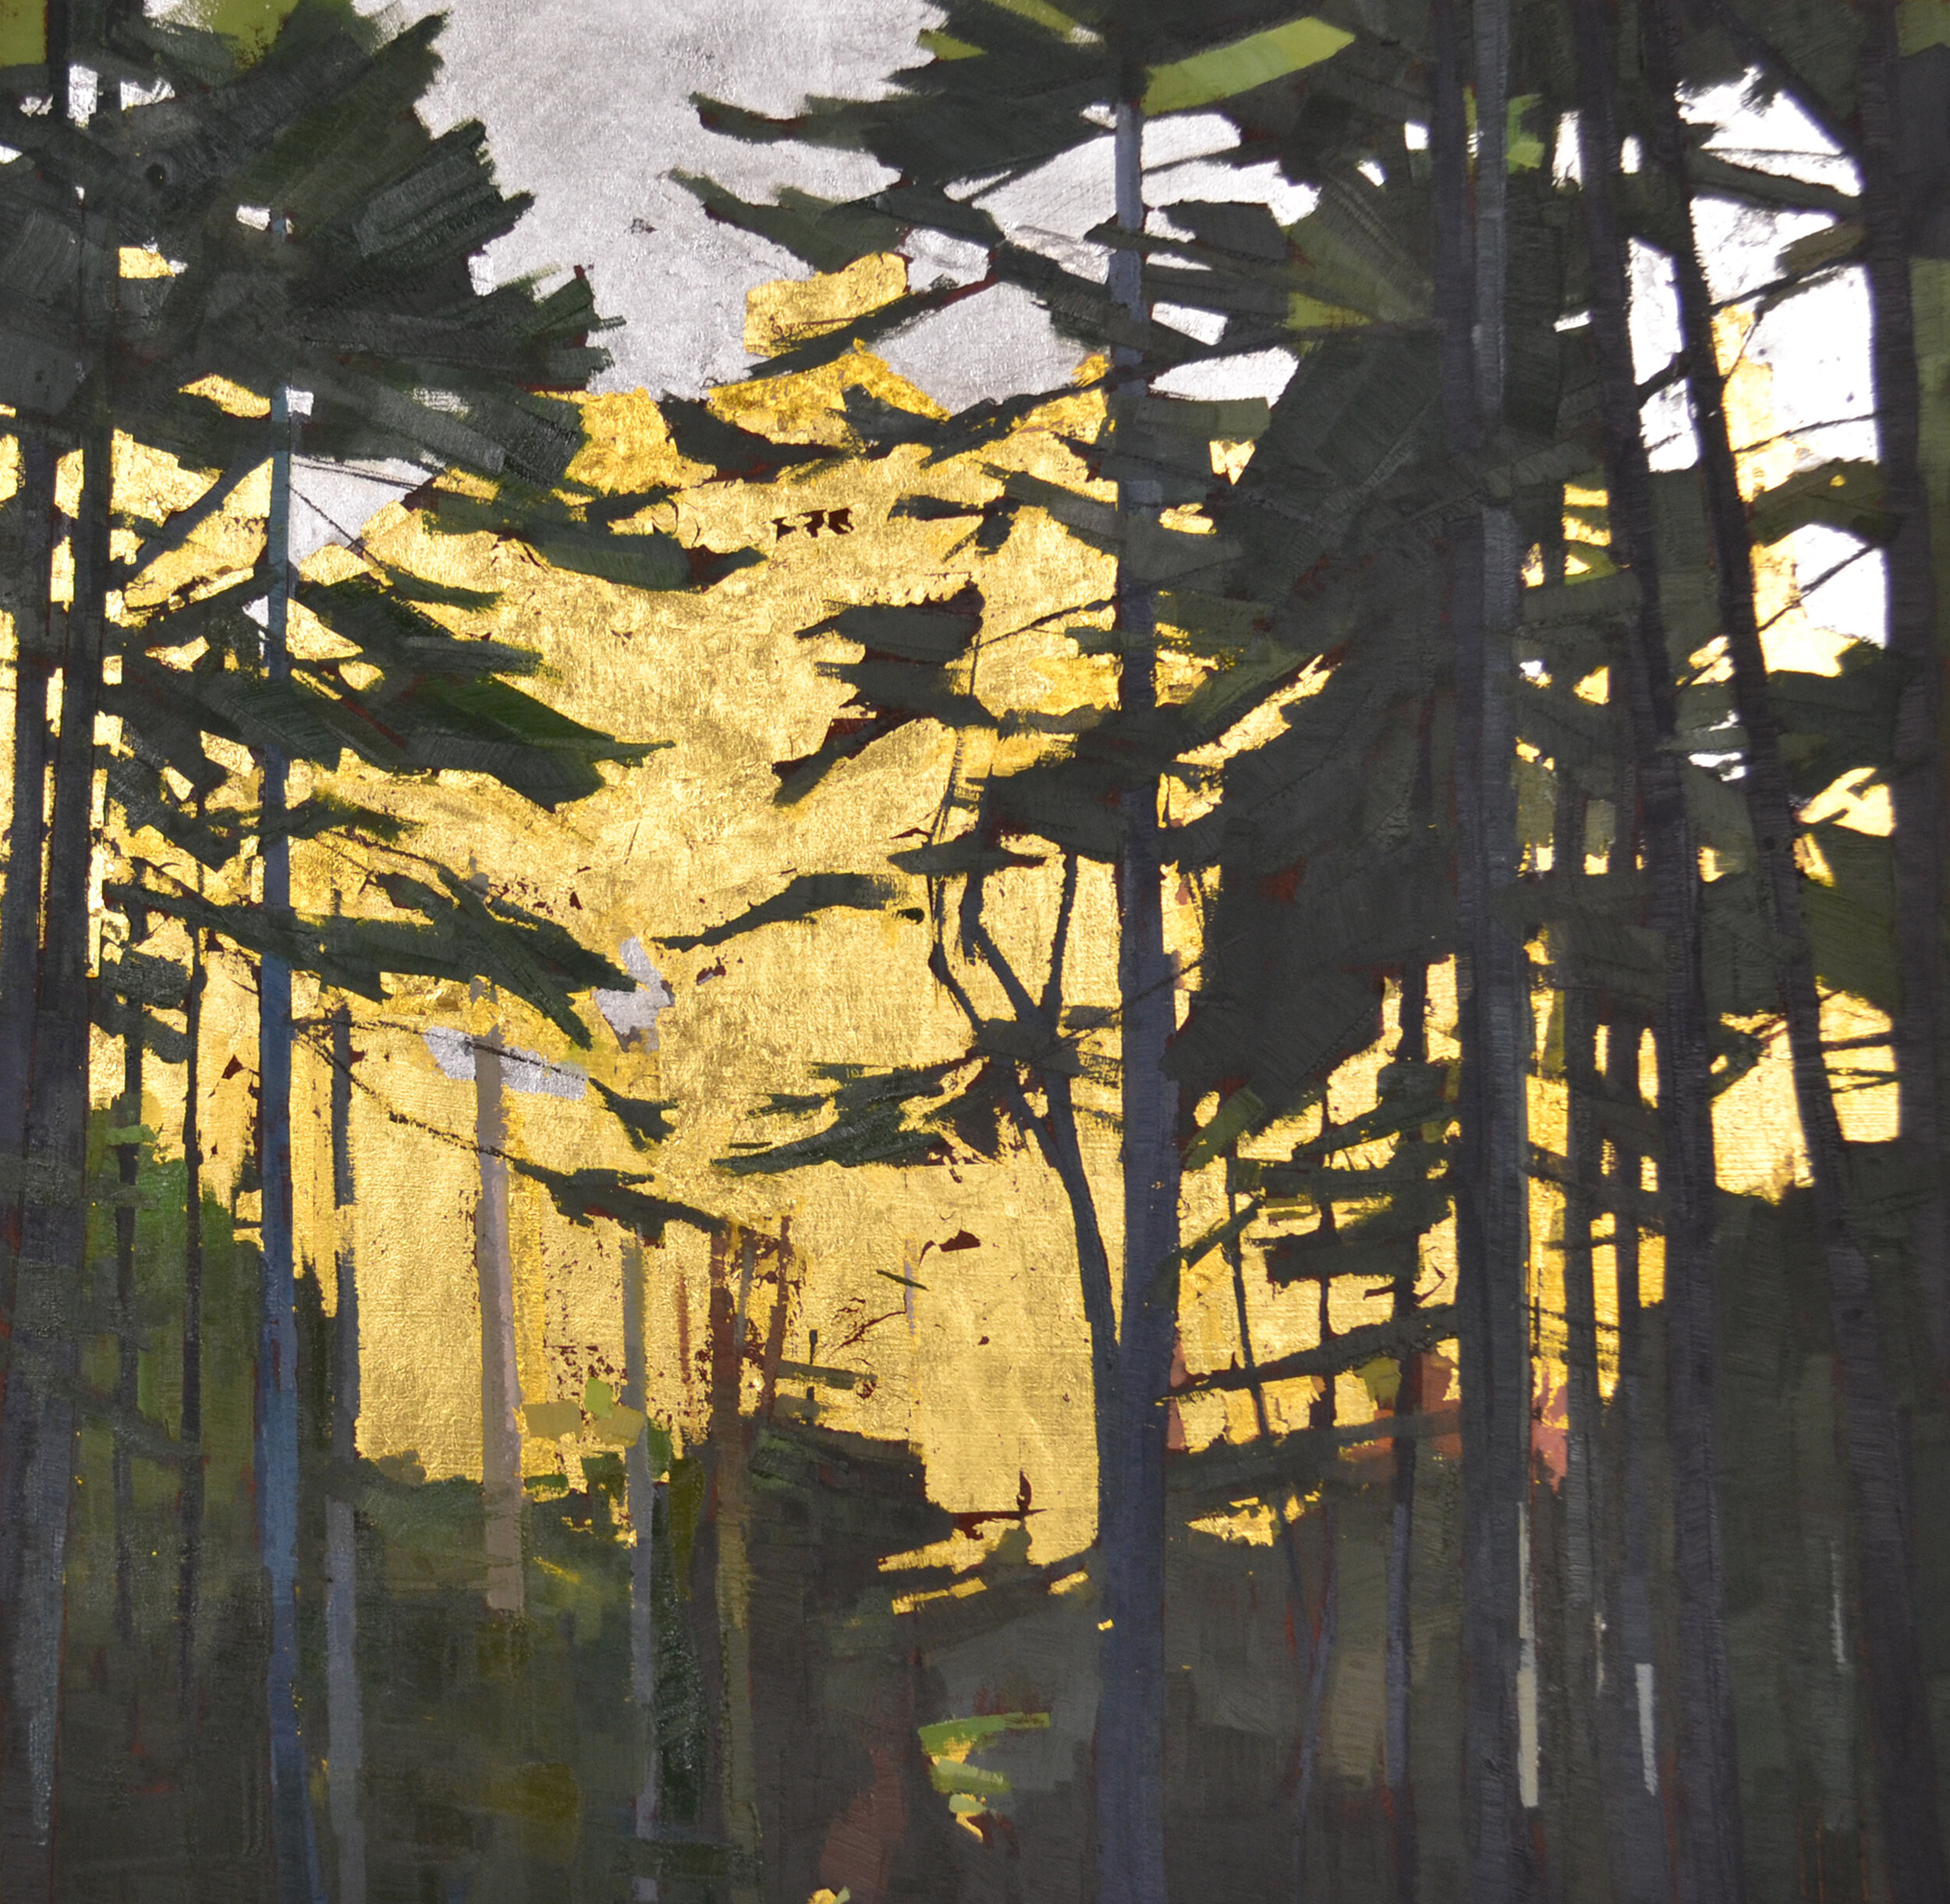   Oaks and Pines  18 x 18 oil, 24K and palladium gold on cradled wood panel   sold    NW Barrett Gallery  